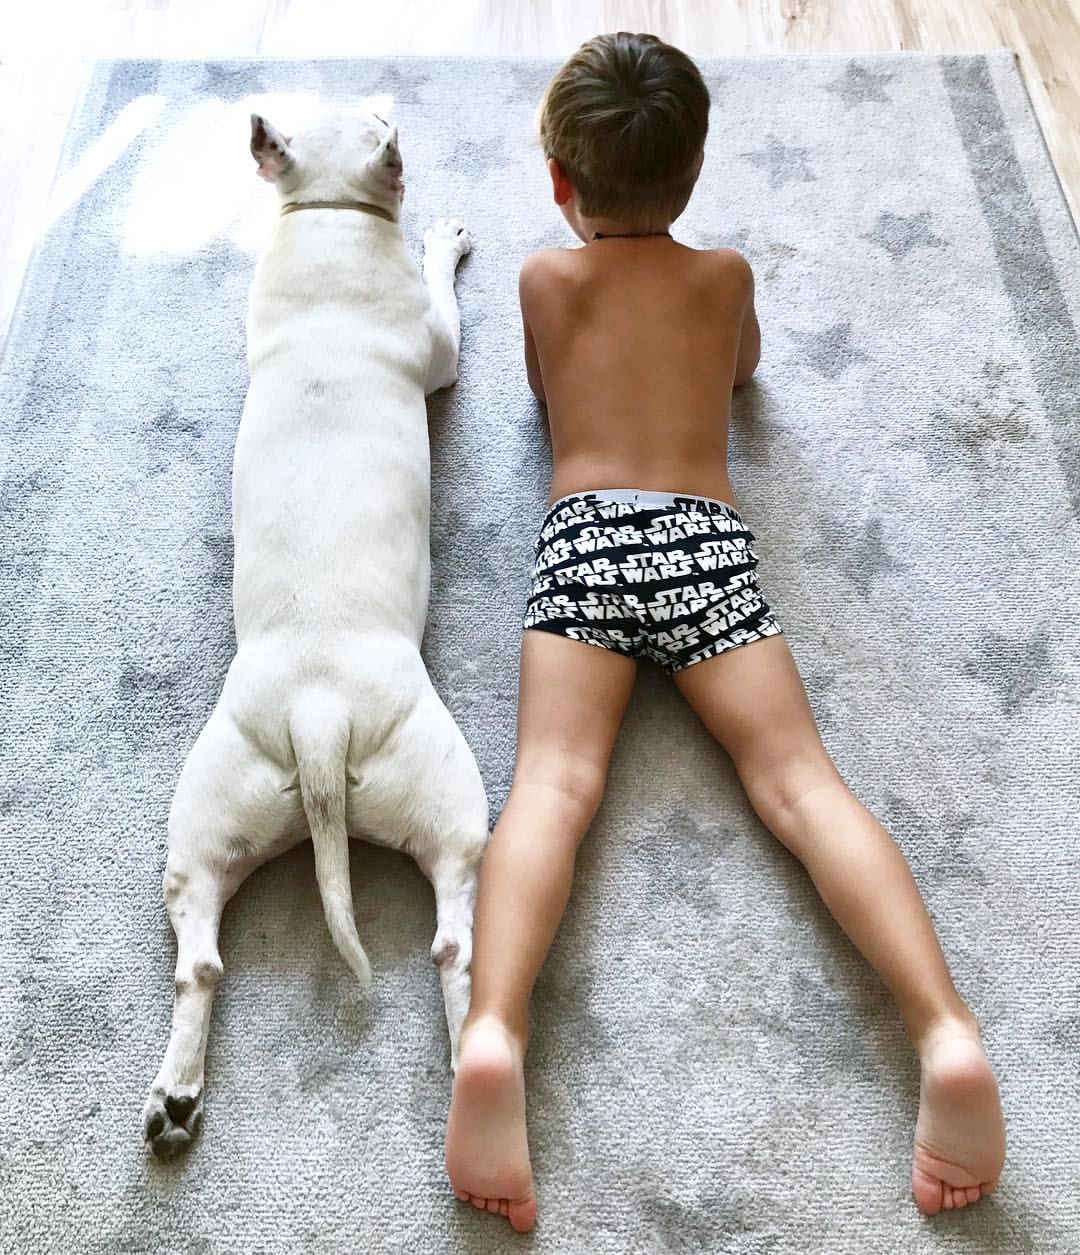 English Bull Terrier lying flat on the floor with a kid